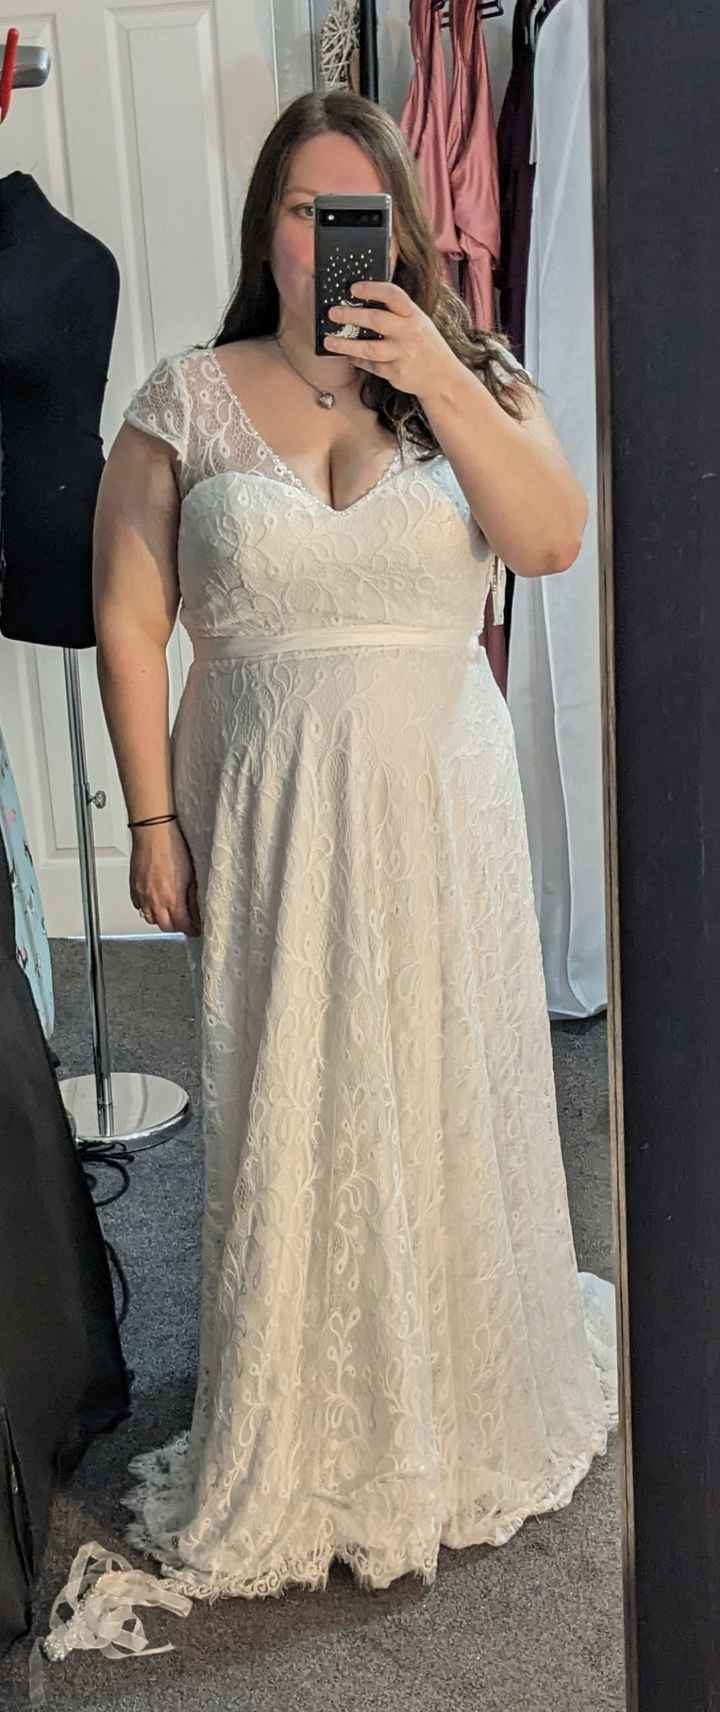 First fitting - 1